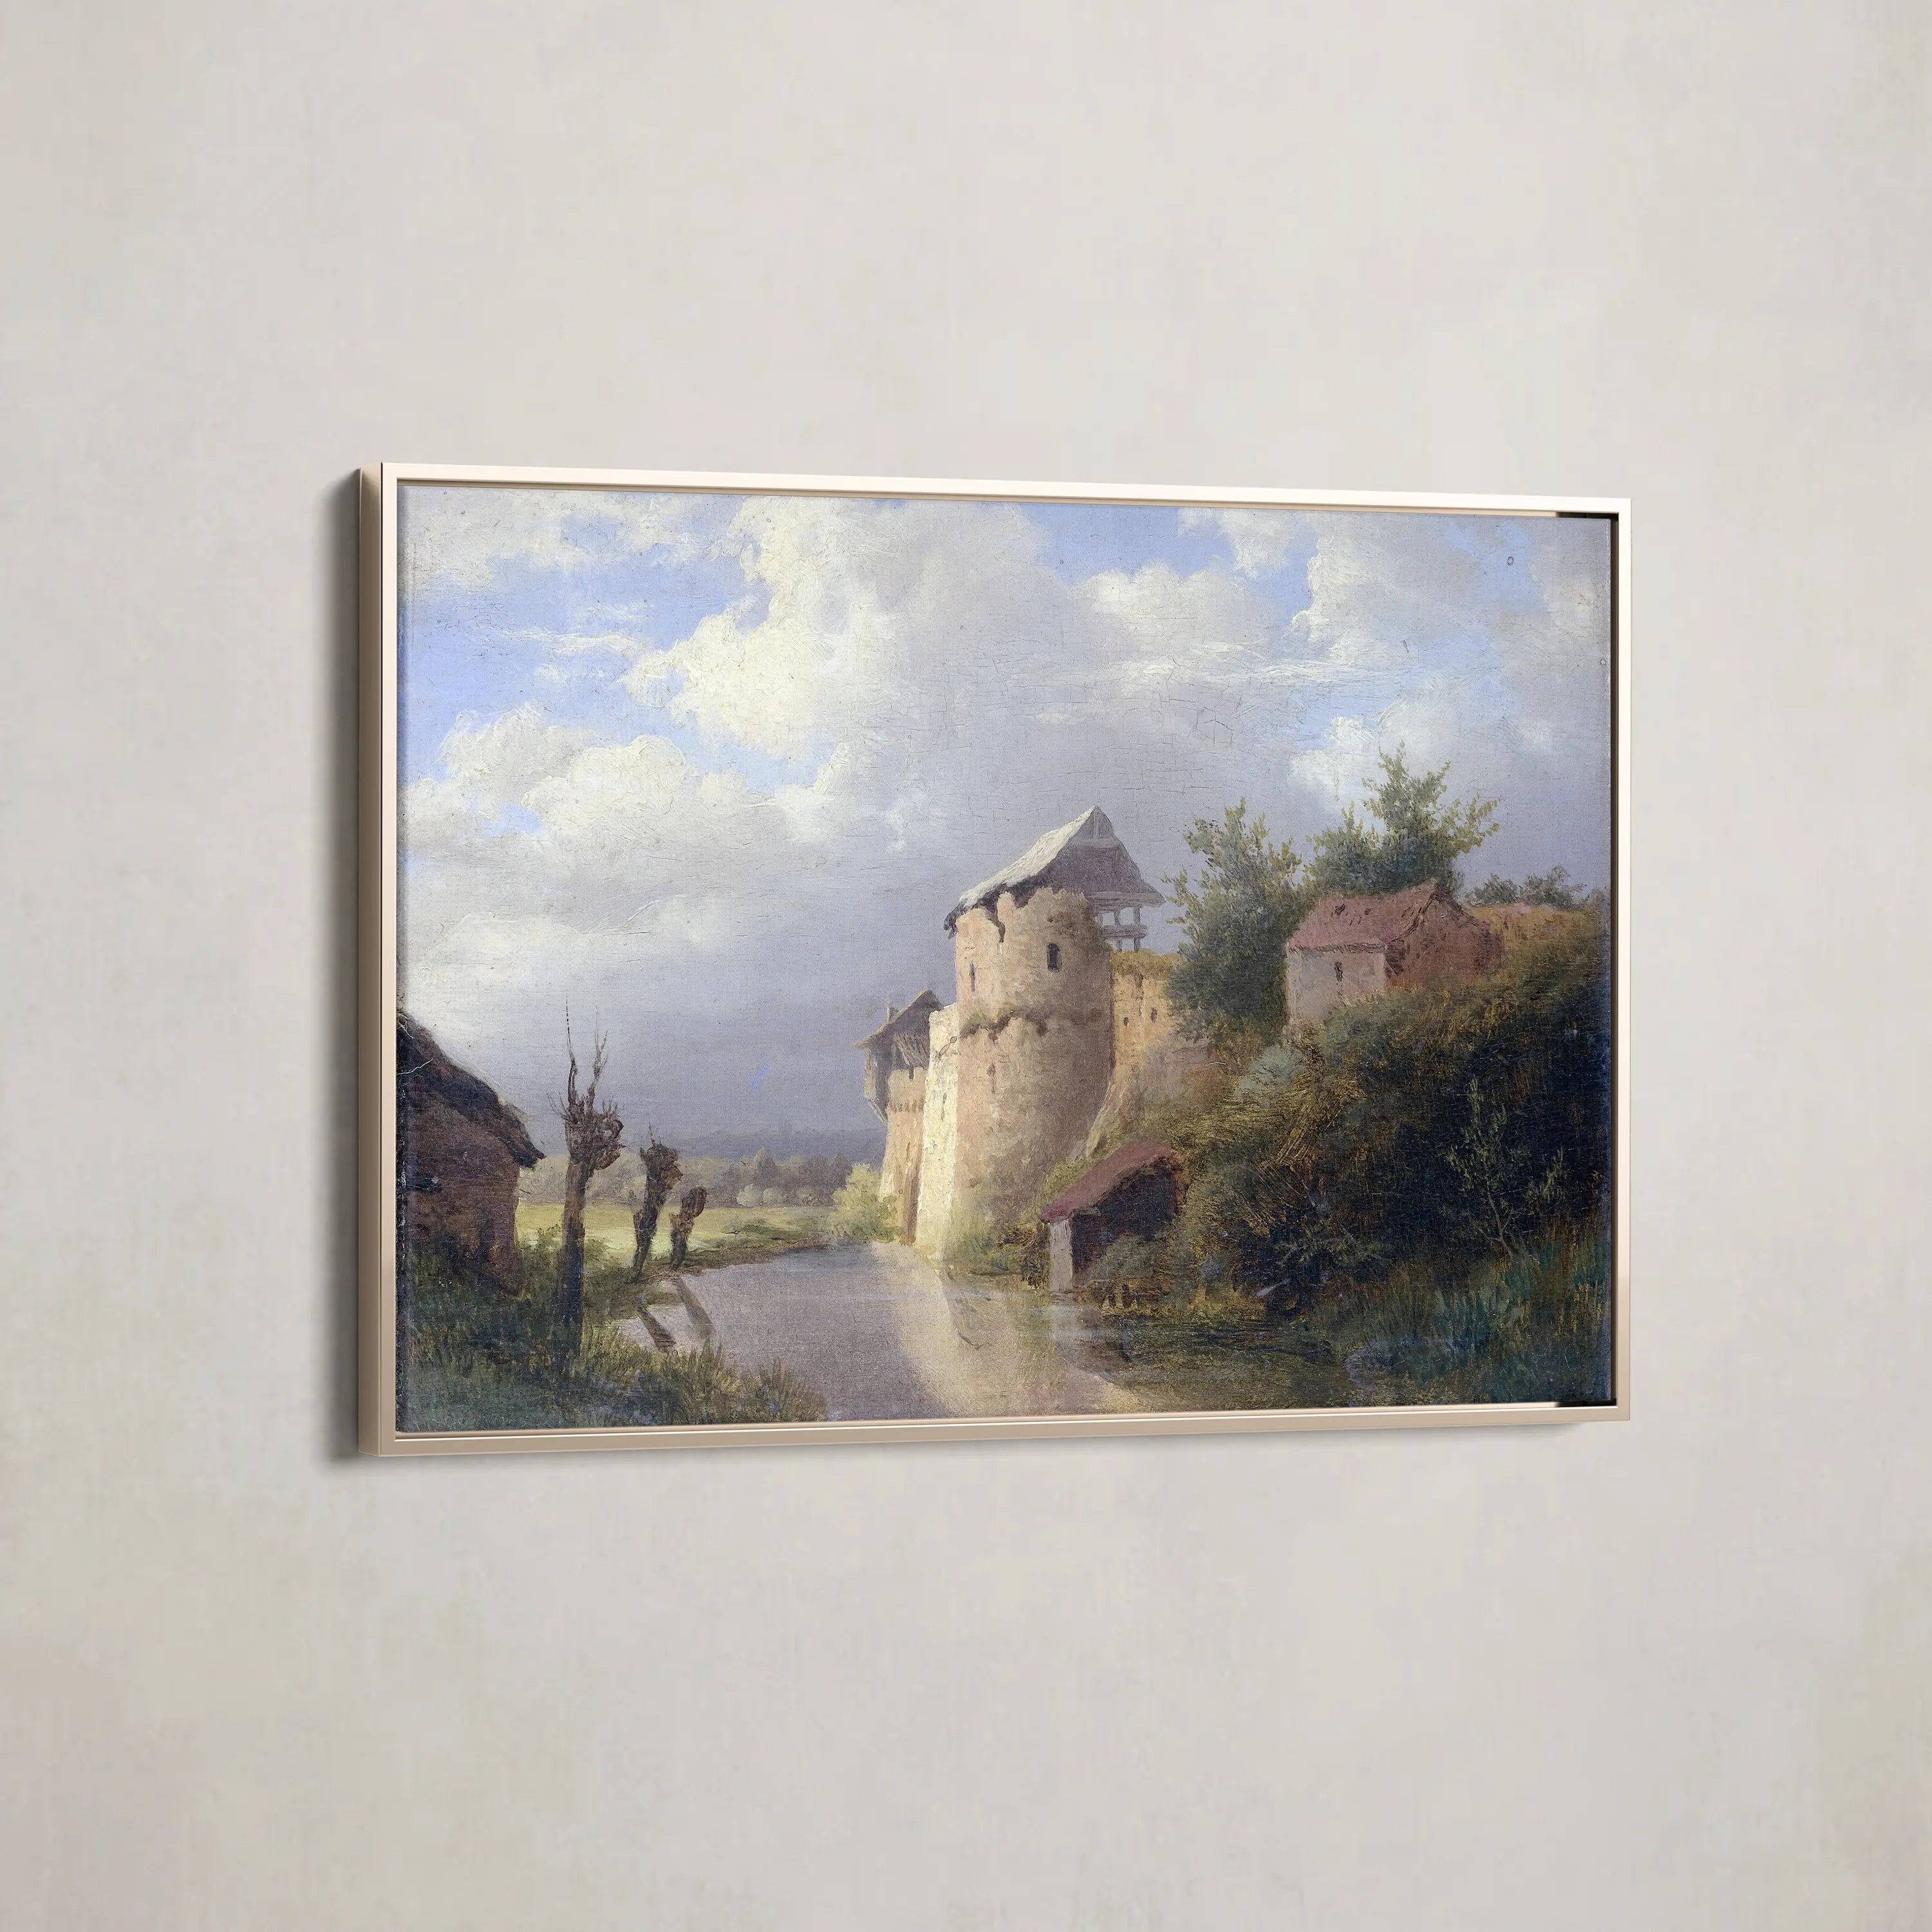 The Old Fortress (1840 - 1860) by Louwrens Hanedoes